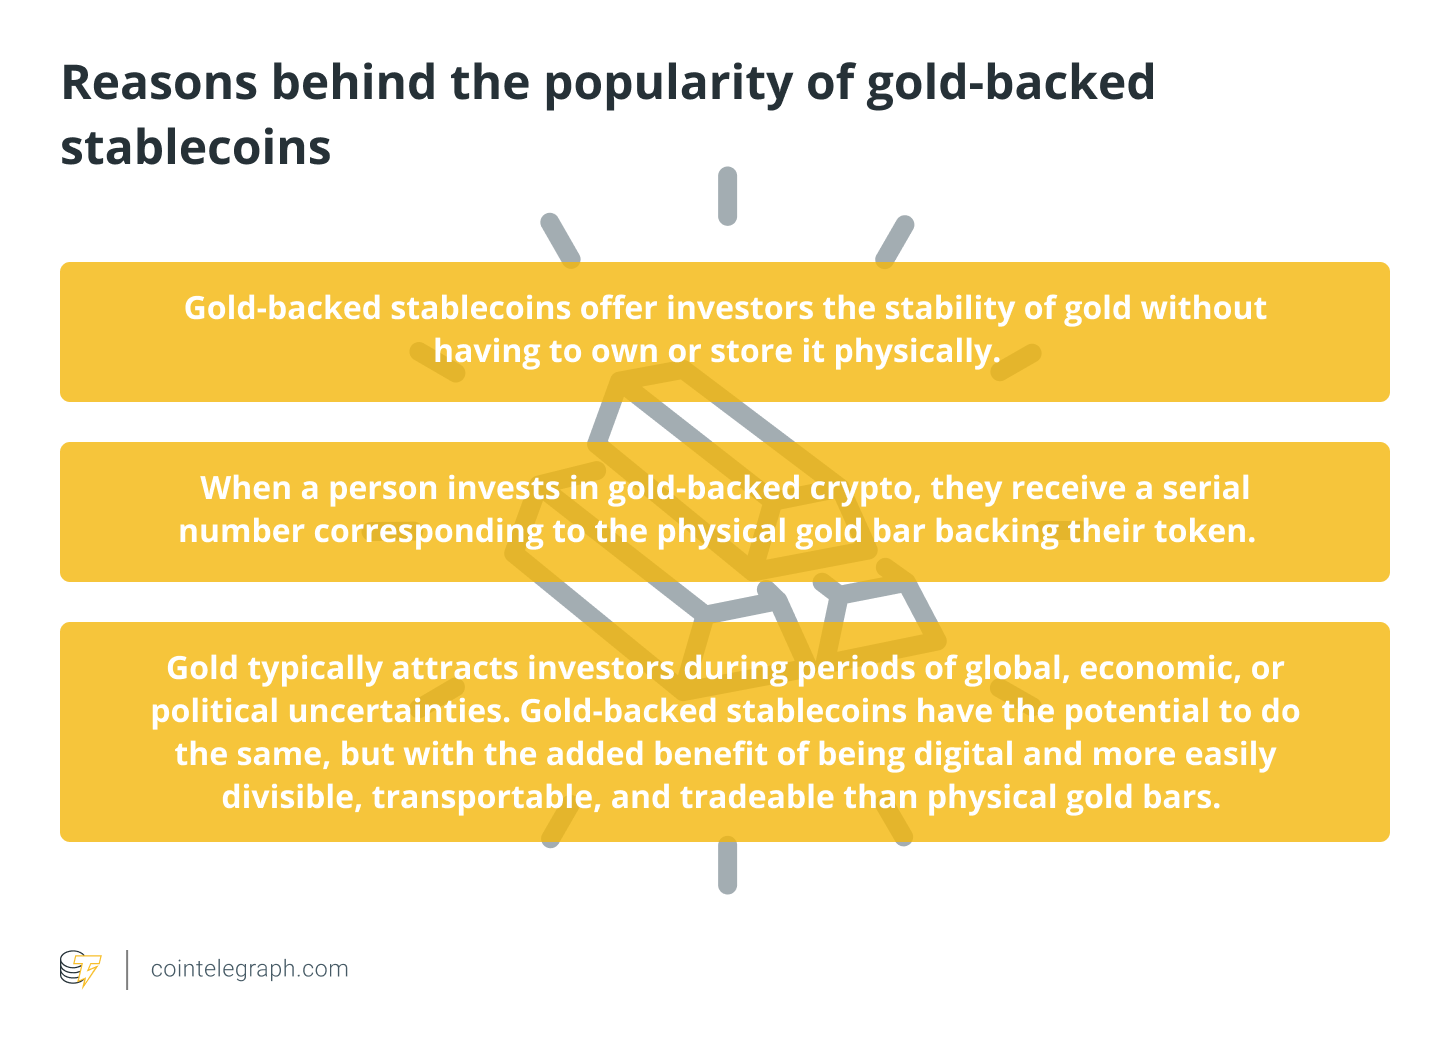 Reasons behind the popularity of gold-backed stablecoins